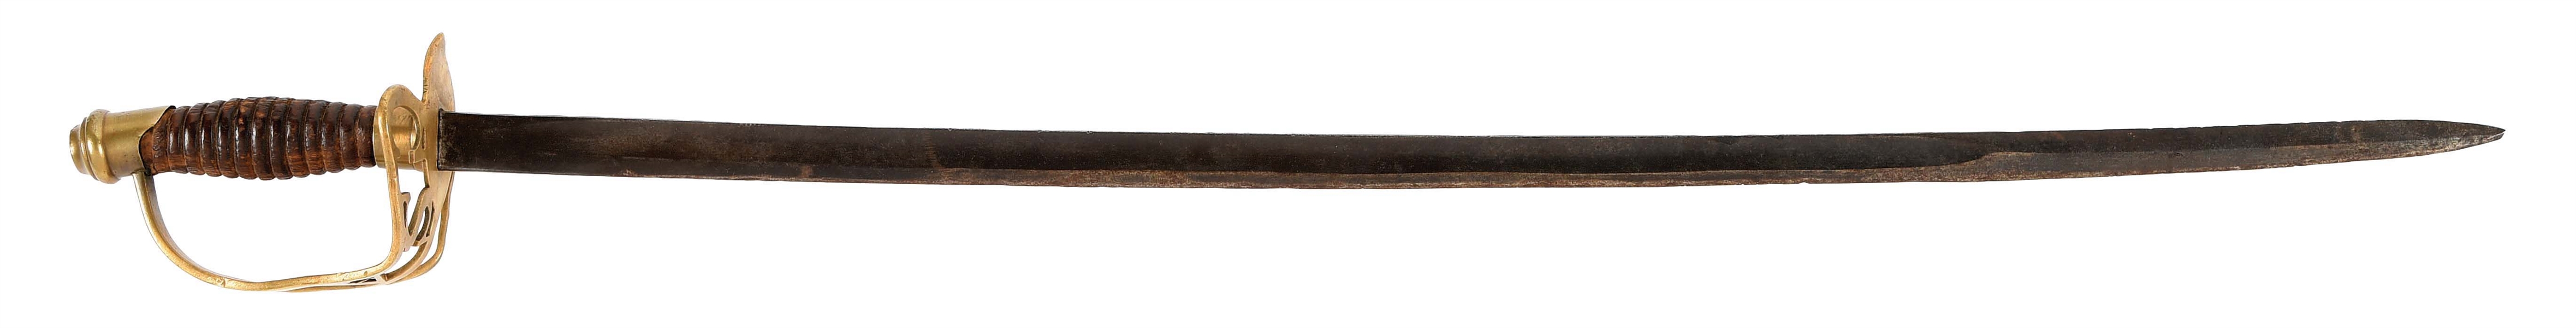 RARE CONFEDERATE STATES ARMORY STAFF & FIELD OFFICERS SWORD.